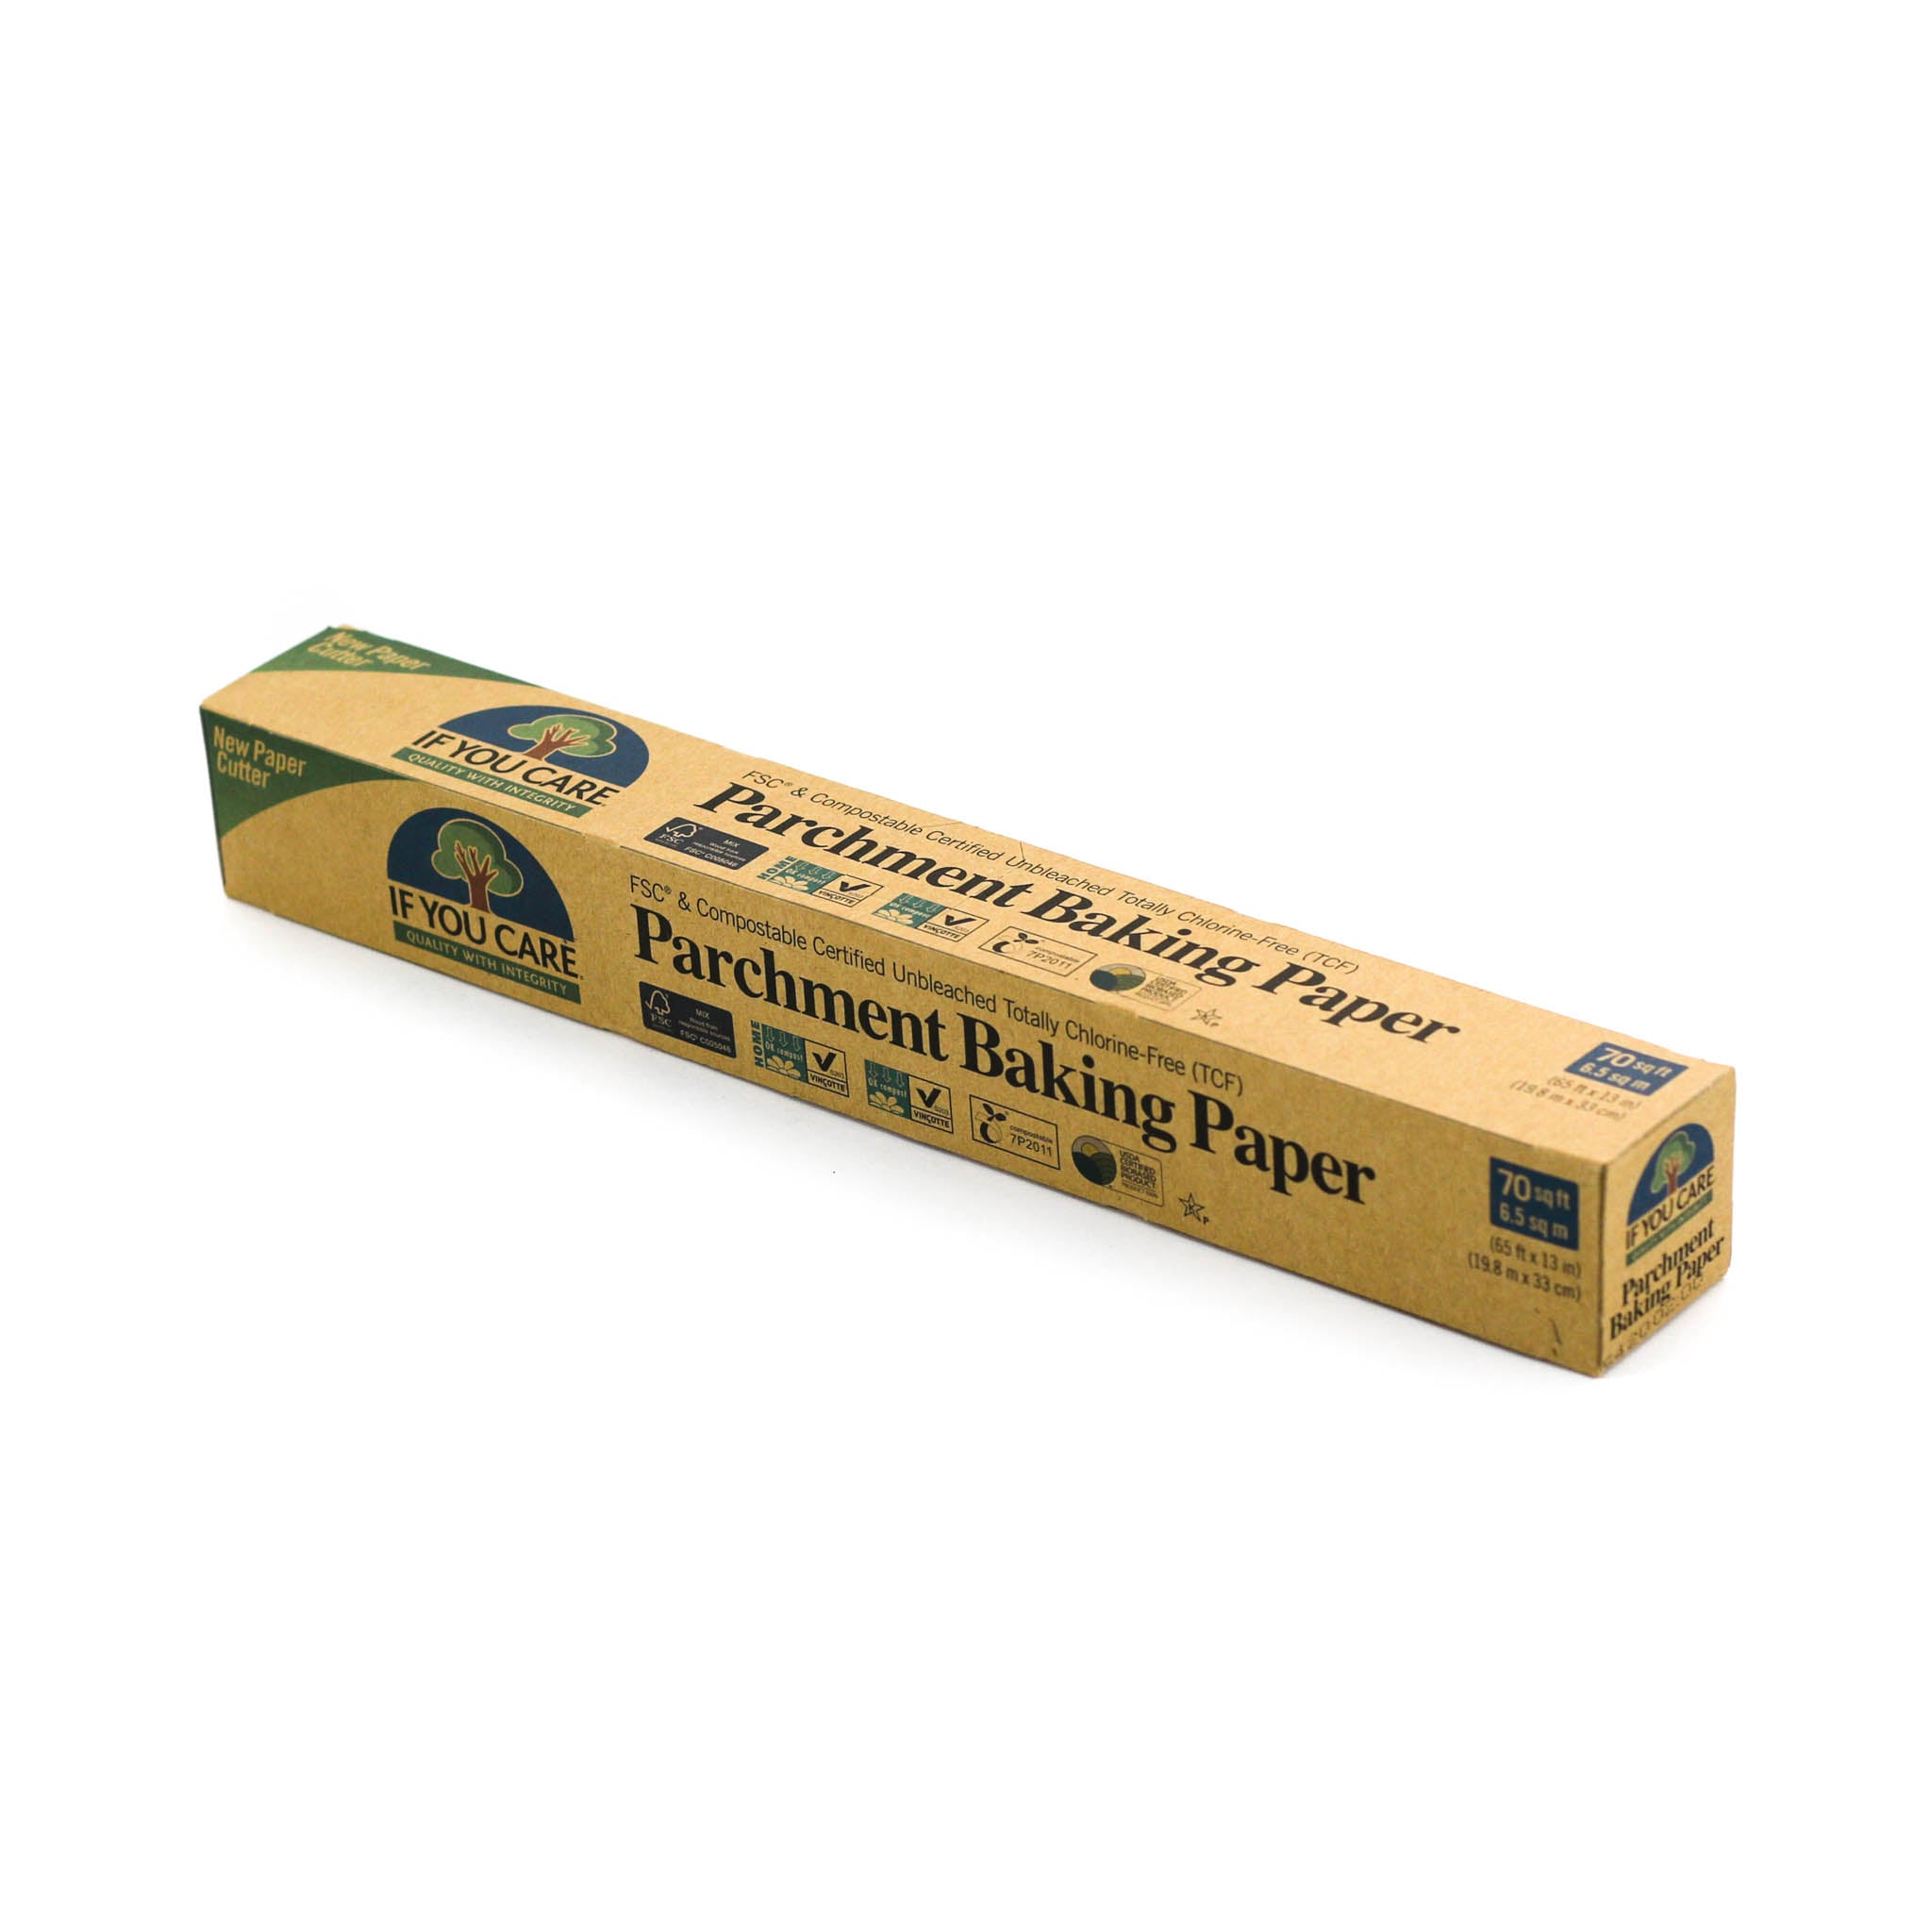 If You Care Parchment Baking Paper Roll 33cm x 19.8m